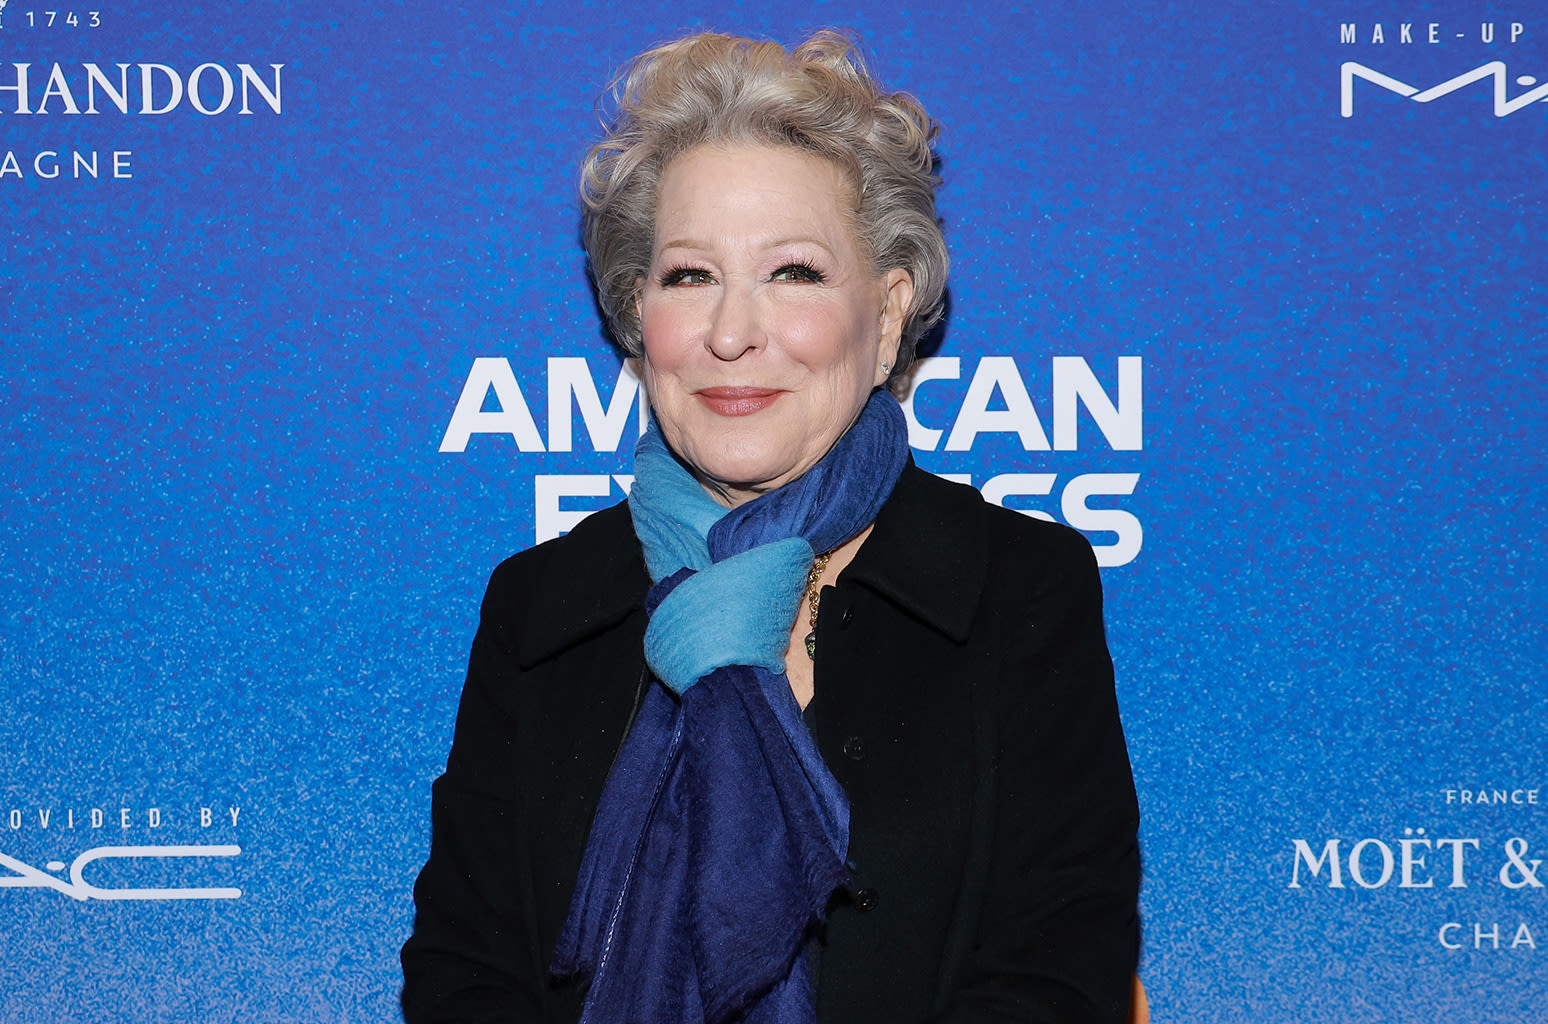 Bette Midler Channels Taylor Swift to Rally ‘Childless Cat Ladies’ After JD Vance Comment